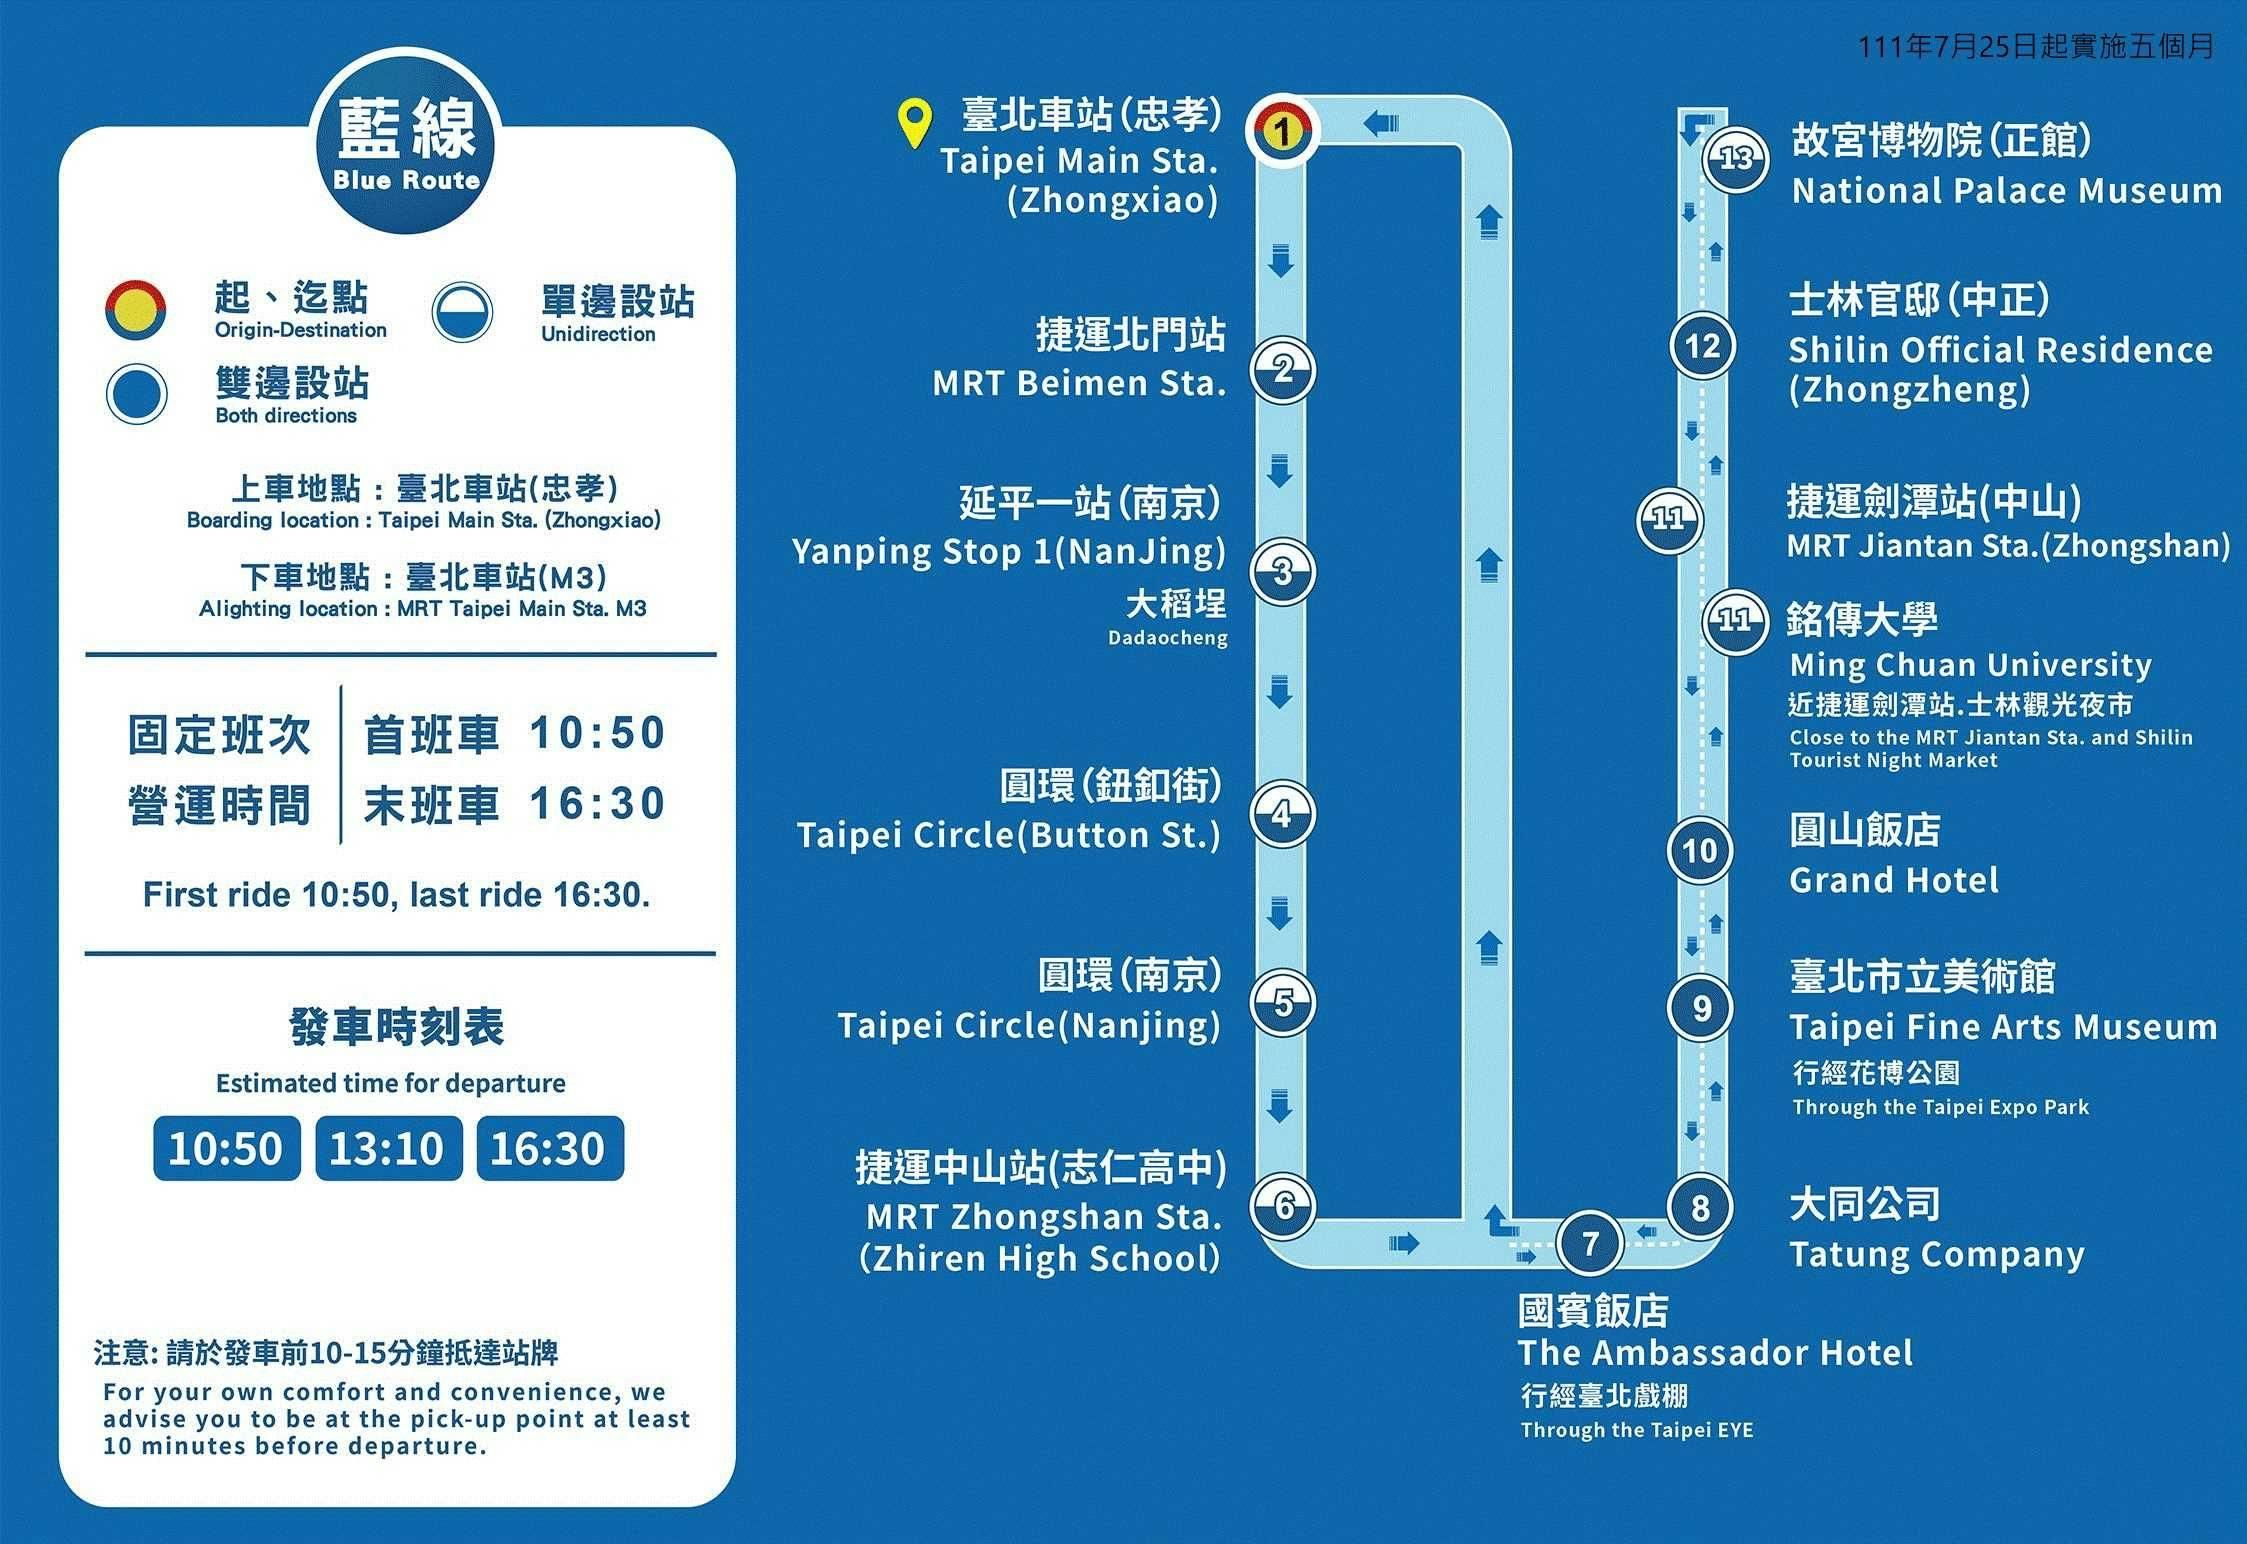 Taipei Sightseeing Bus Blue routeRoute Map-台北市 Bus